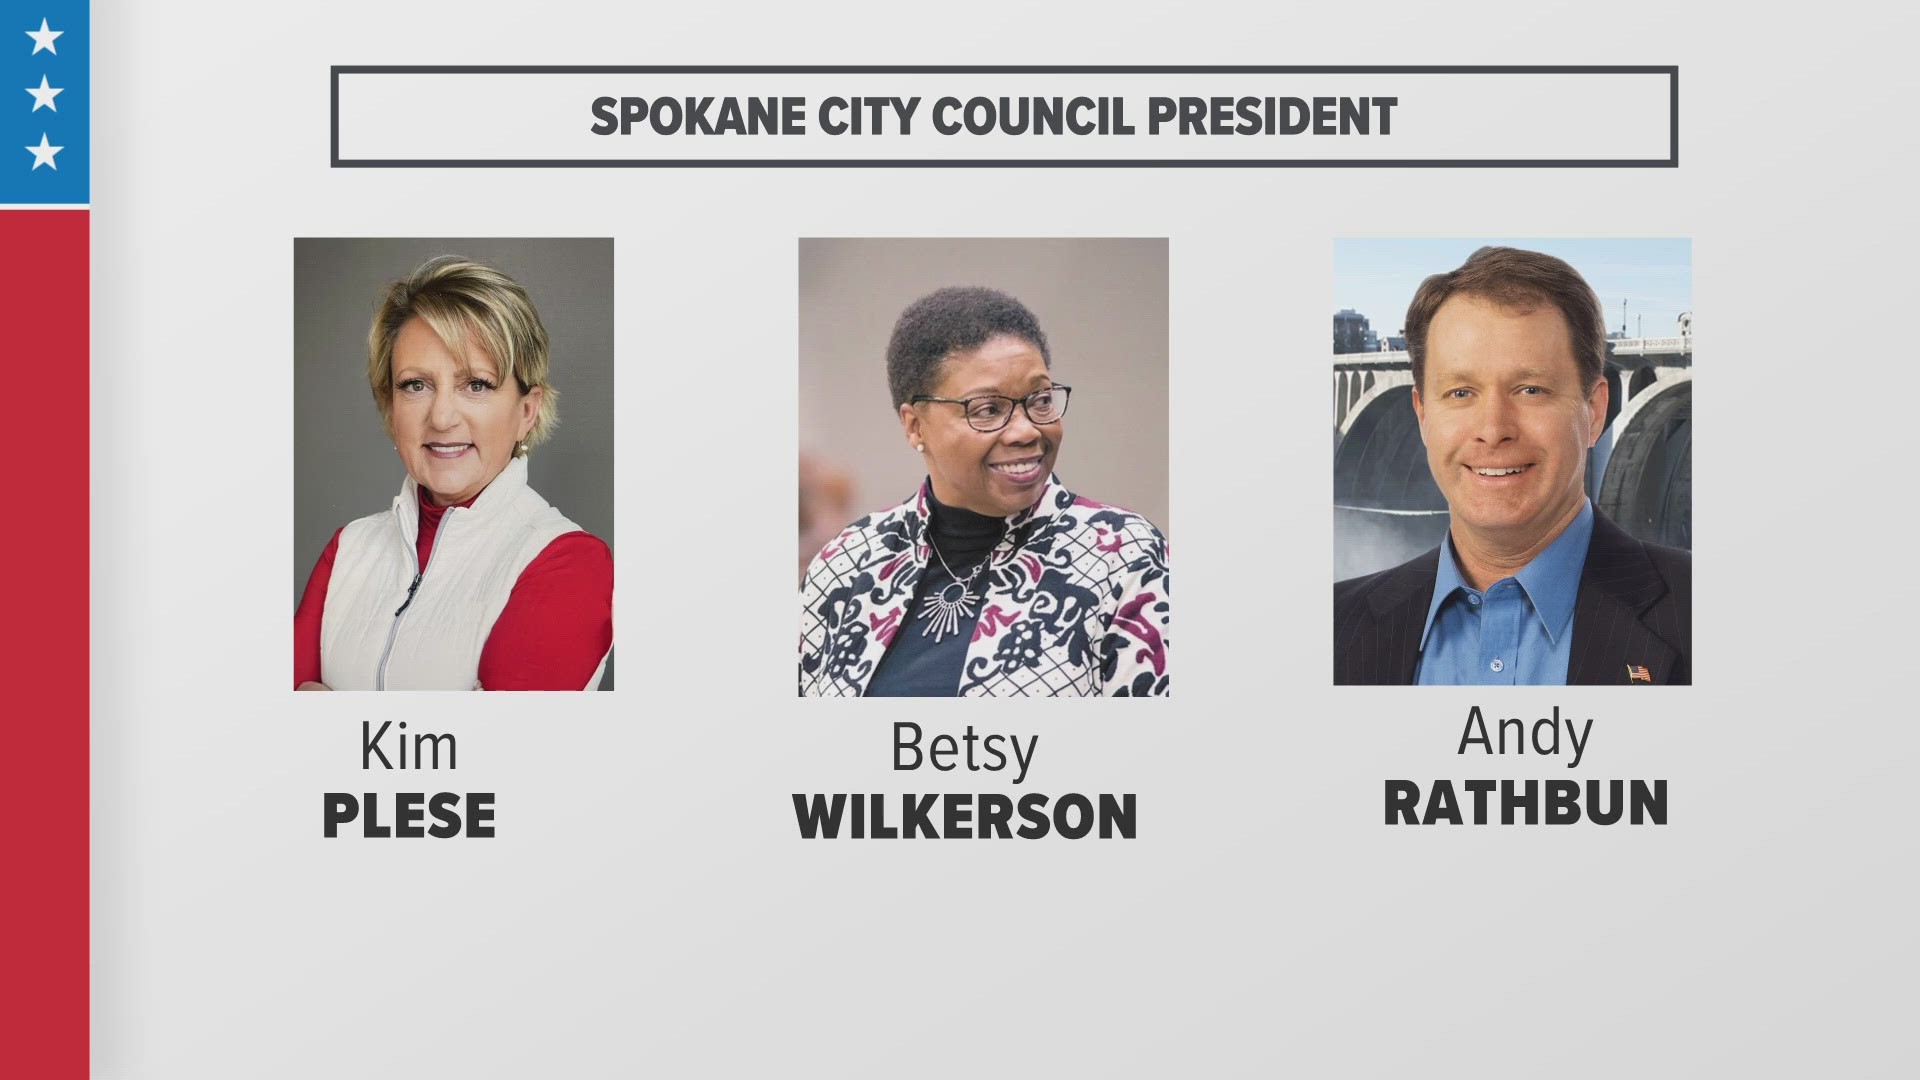 This year, voters will select the next mayor and city council president.